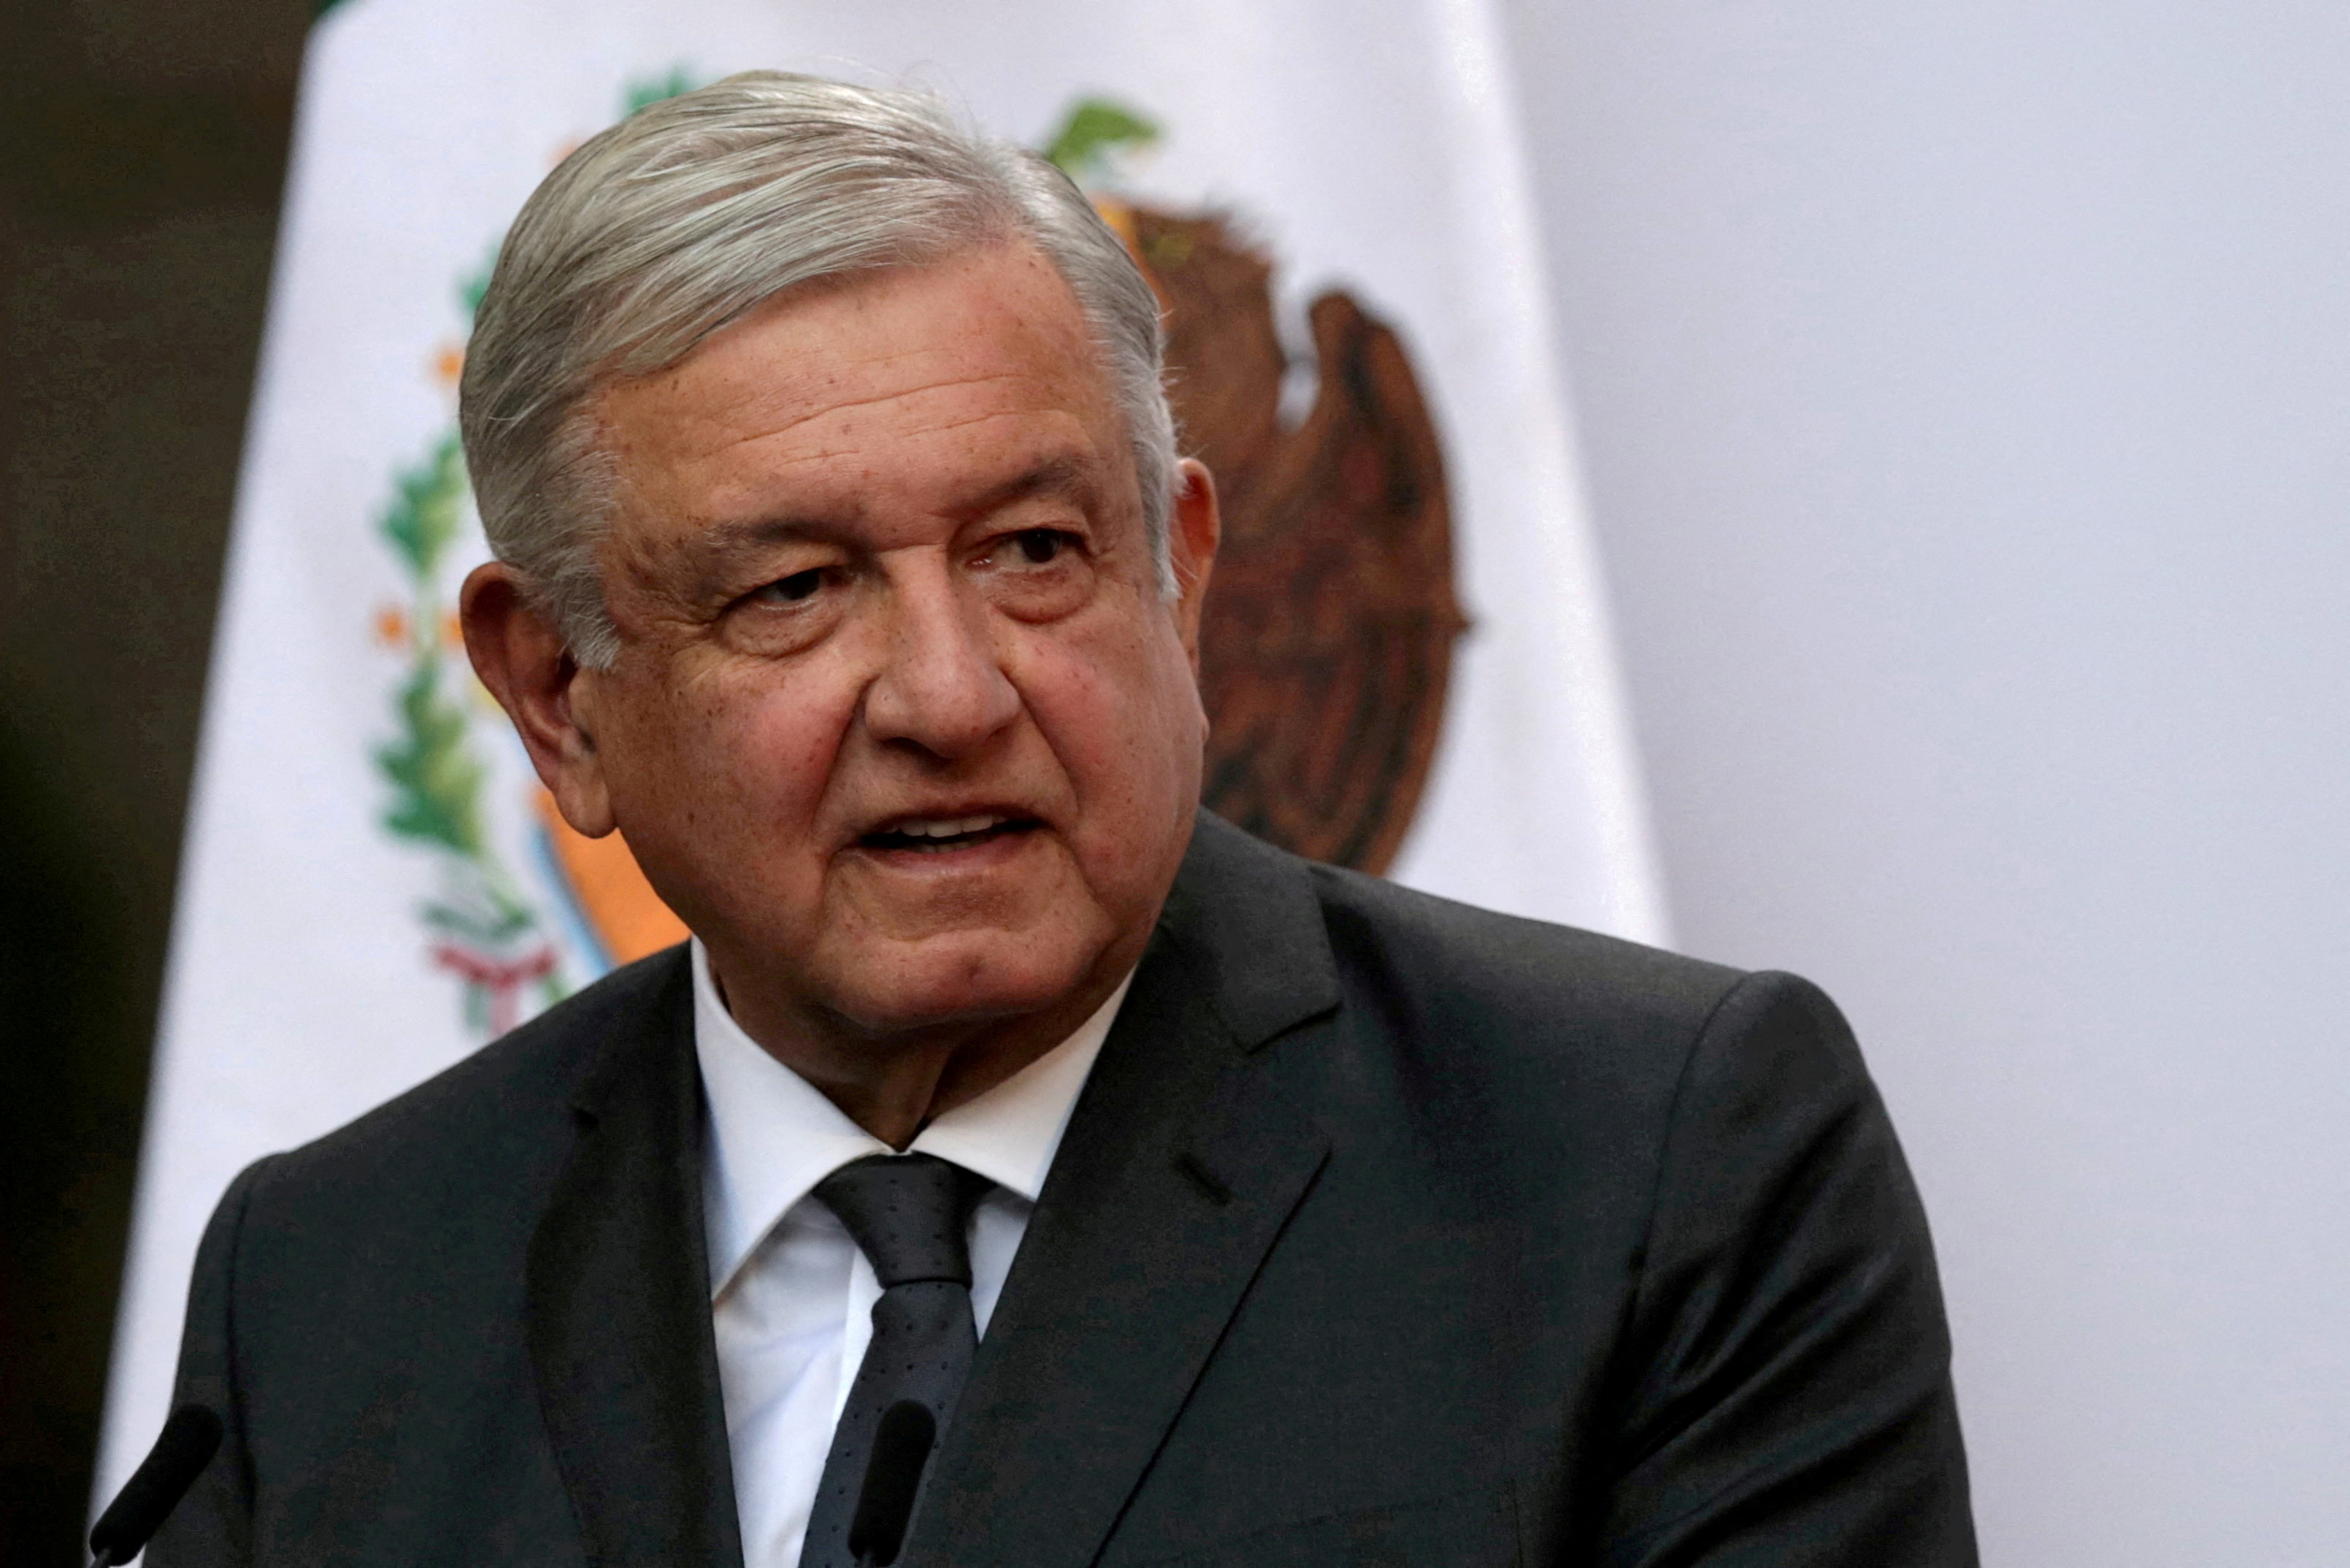 Mexico's President Andres Manuel Lopez Obrador addresses the nation on his second anniversary as the President of Mexico, at the National Palace in Mexico City